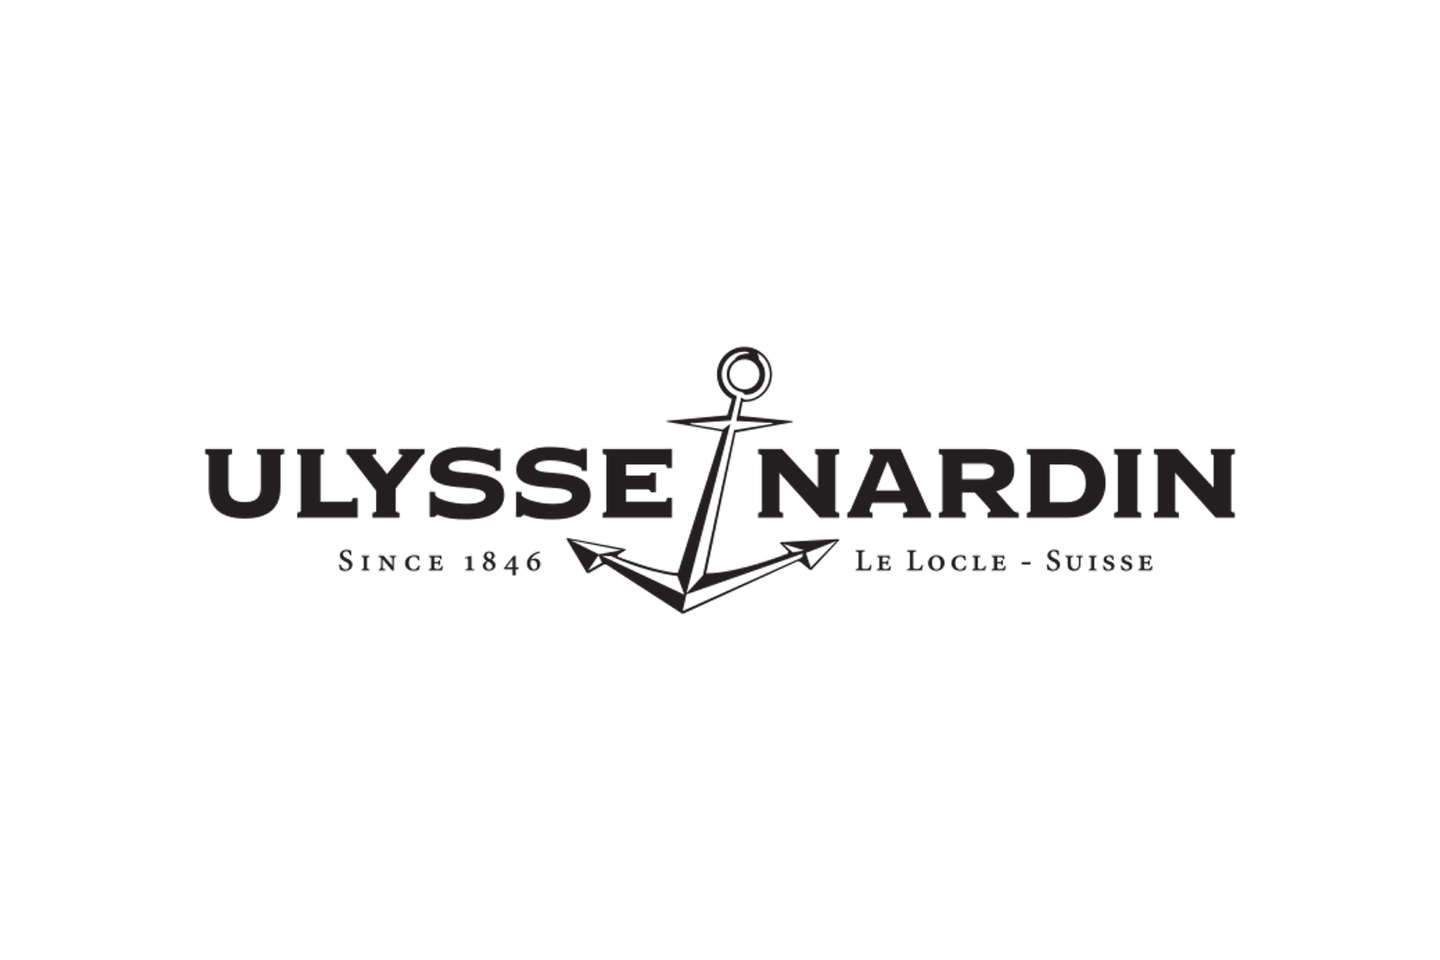 CEO of Ulysse Nardin, Rolf W. Schnyder has unexpectedly passed on